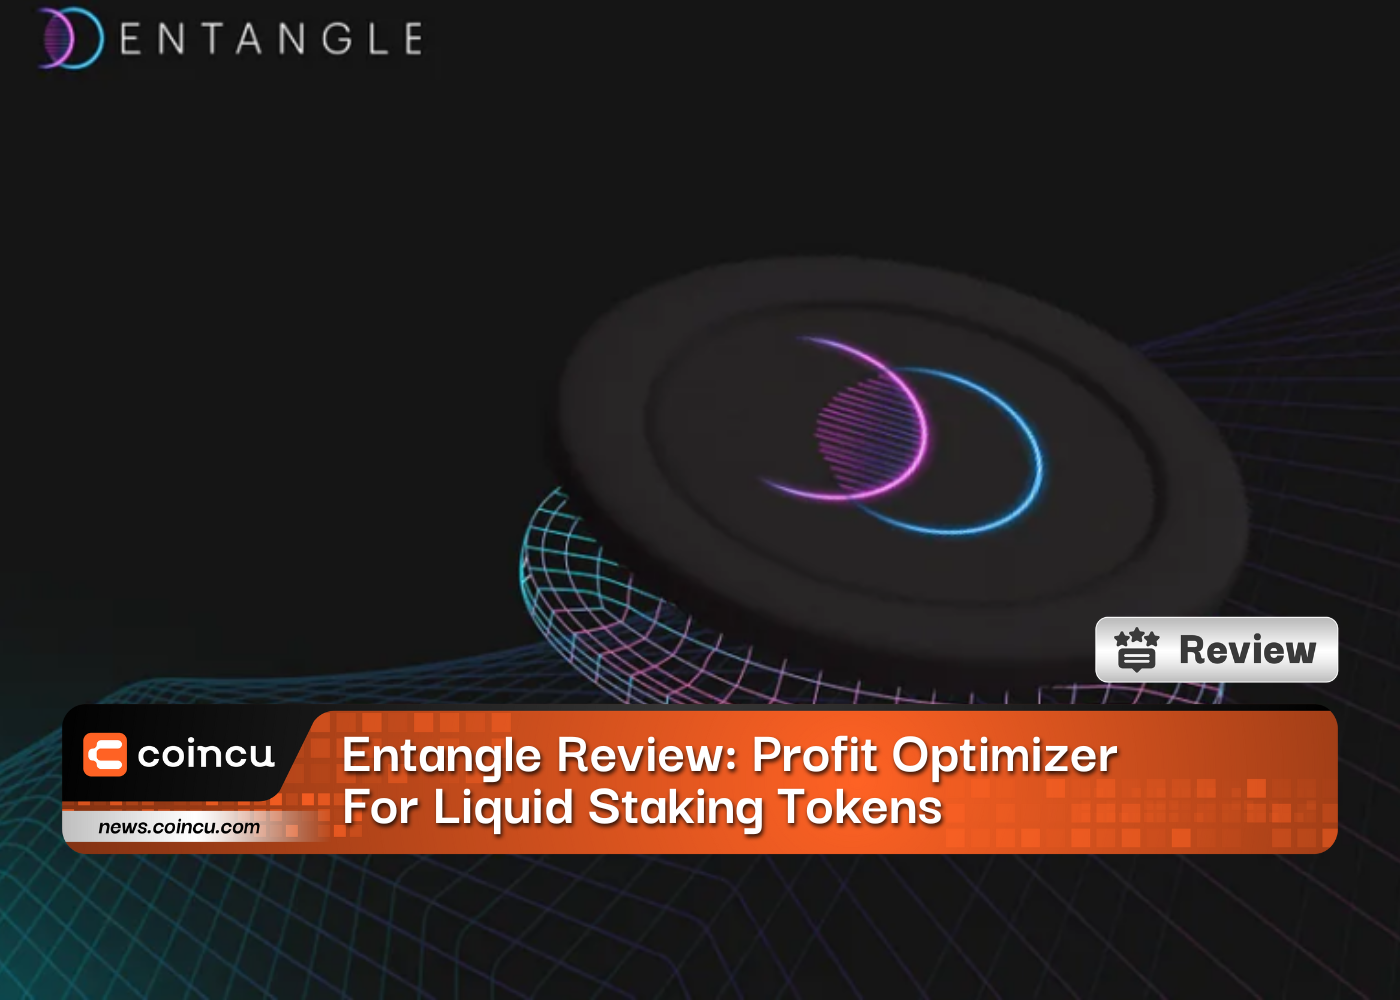 Entangle Review: Profit Optimizer For Liquid Staking Tokens